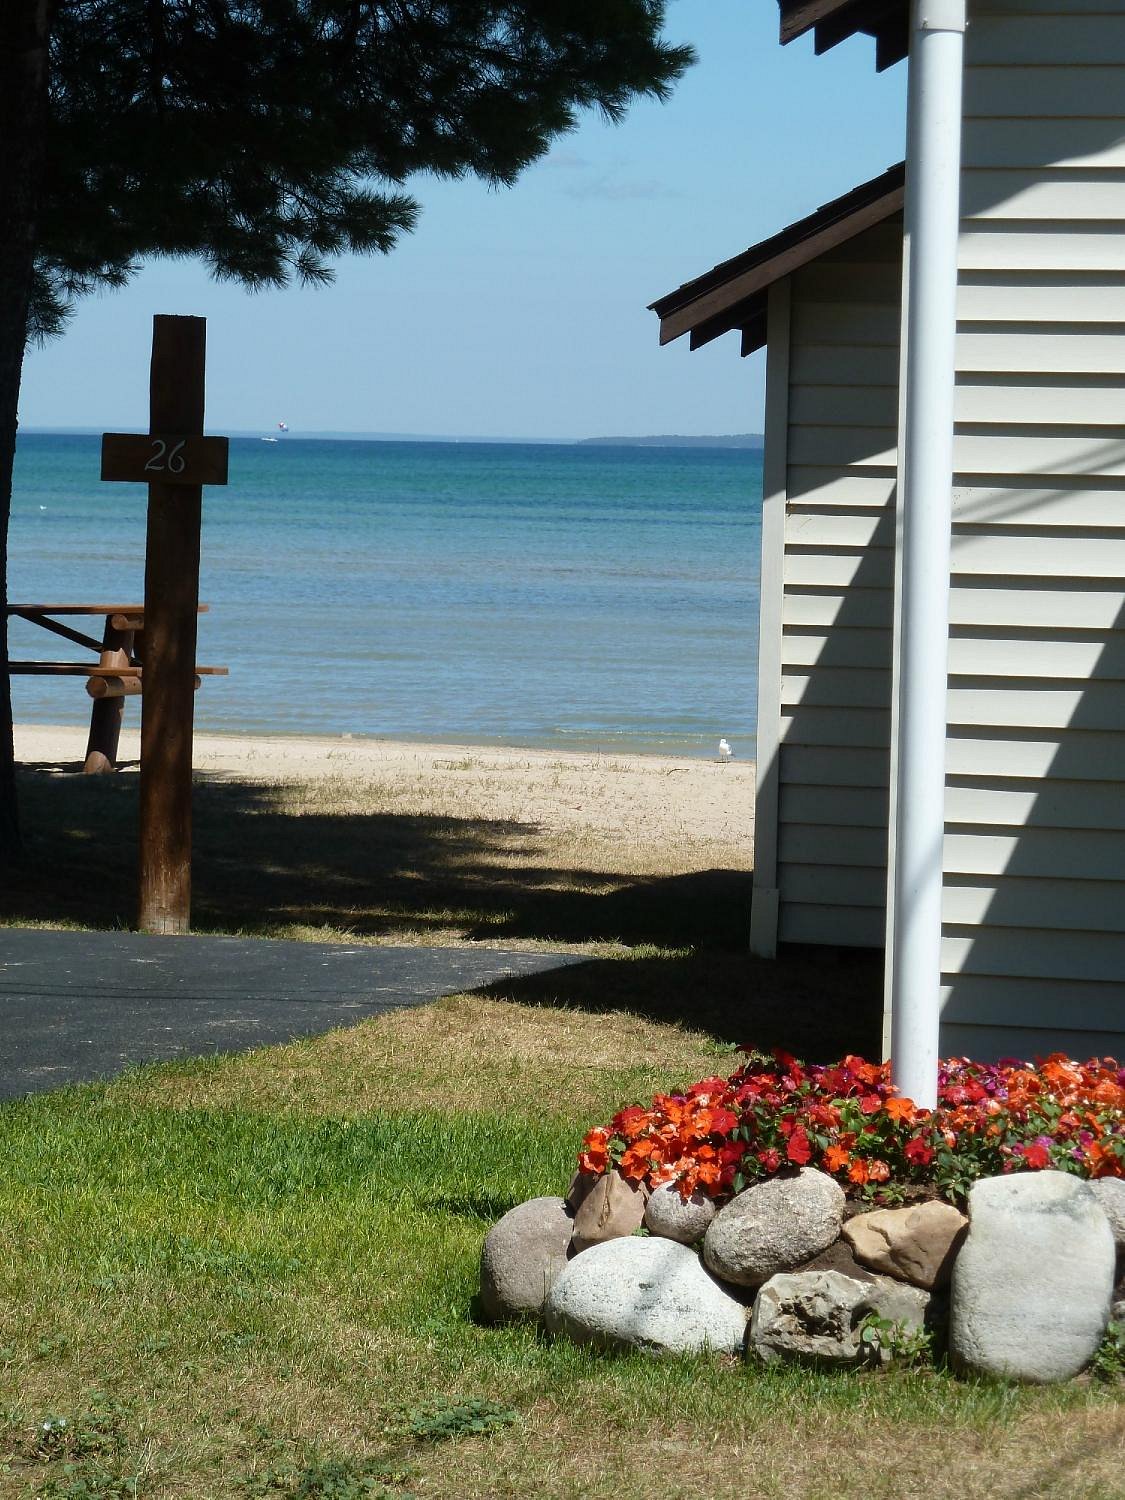 NEW Private Lake Michigan beach house on Good Harbor Bay, minutes